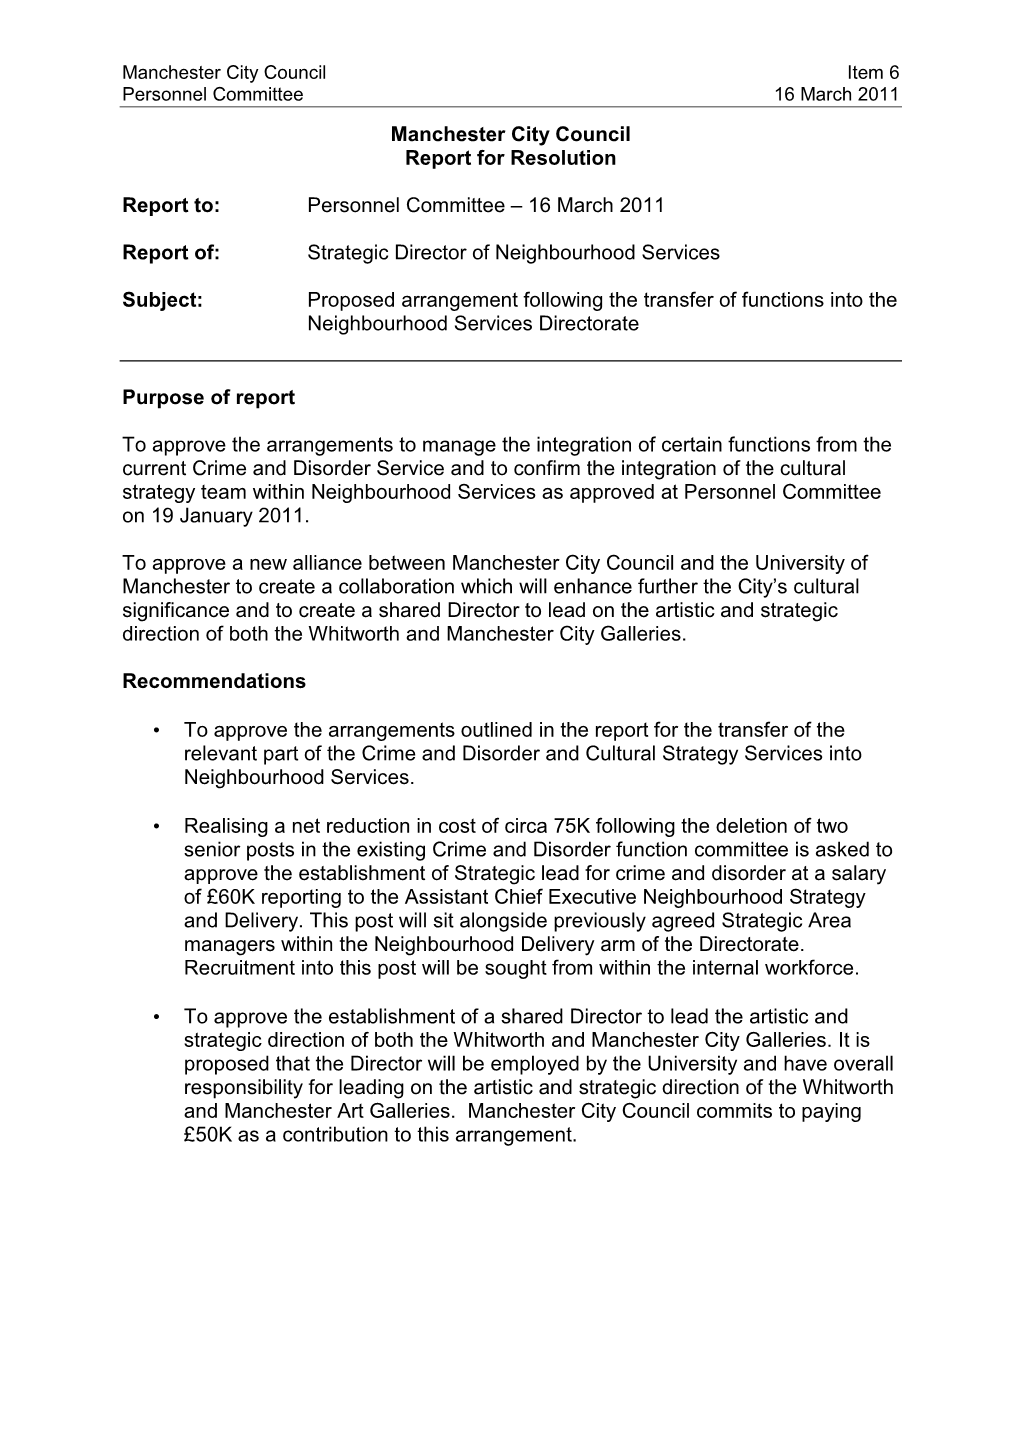 Report on Proposed Aarrangement Following Transfer of Functions Into